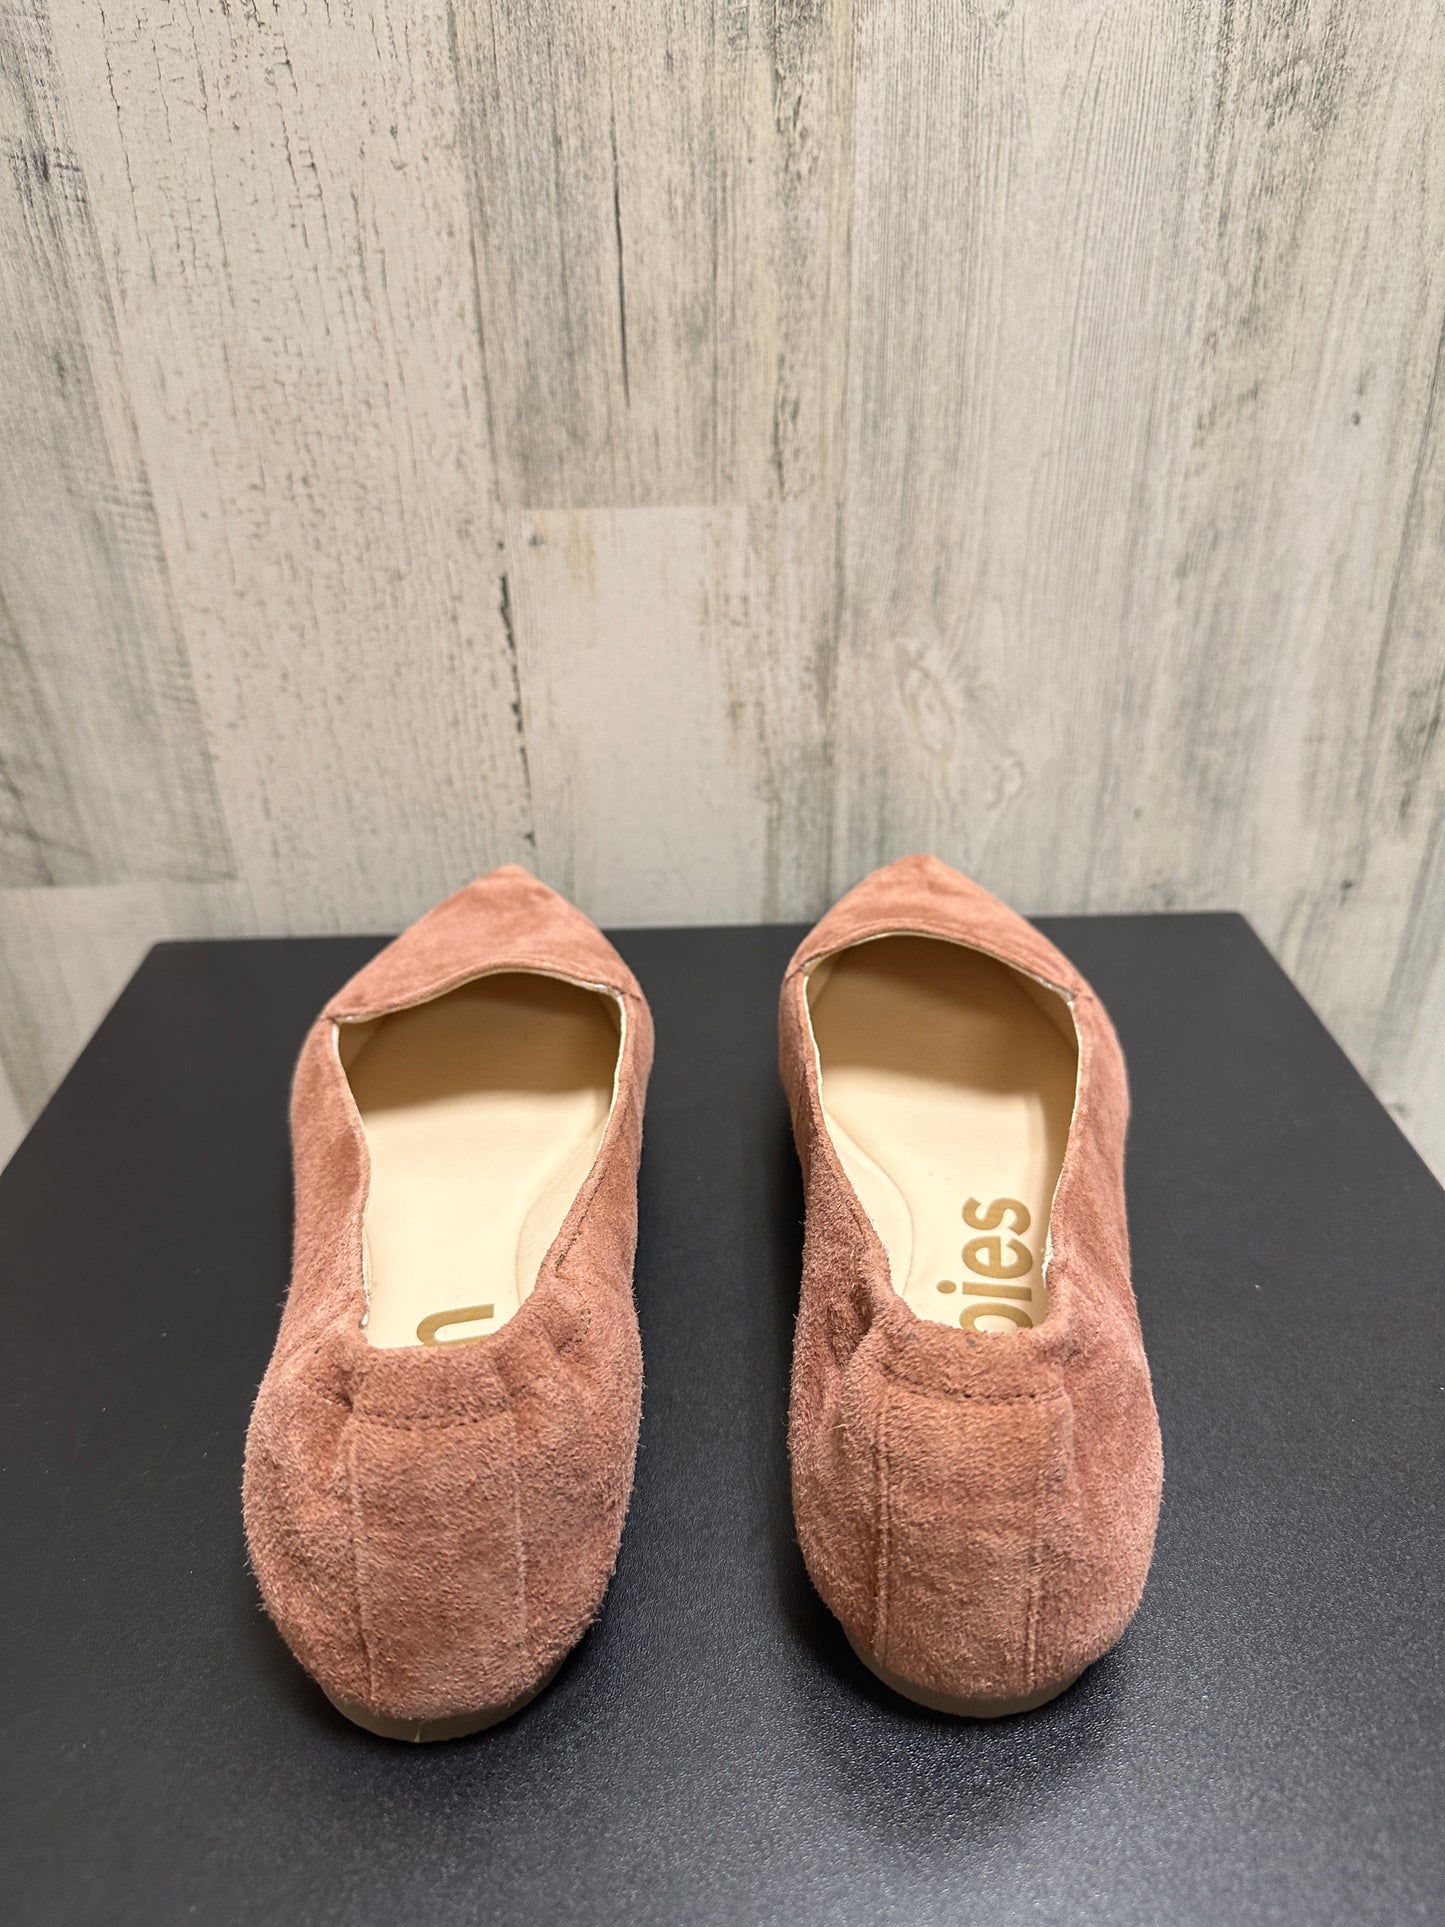 Shoes Flats Boat By Hush Puppies  Size: 8.5